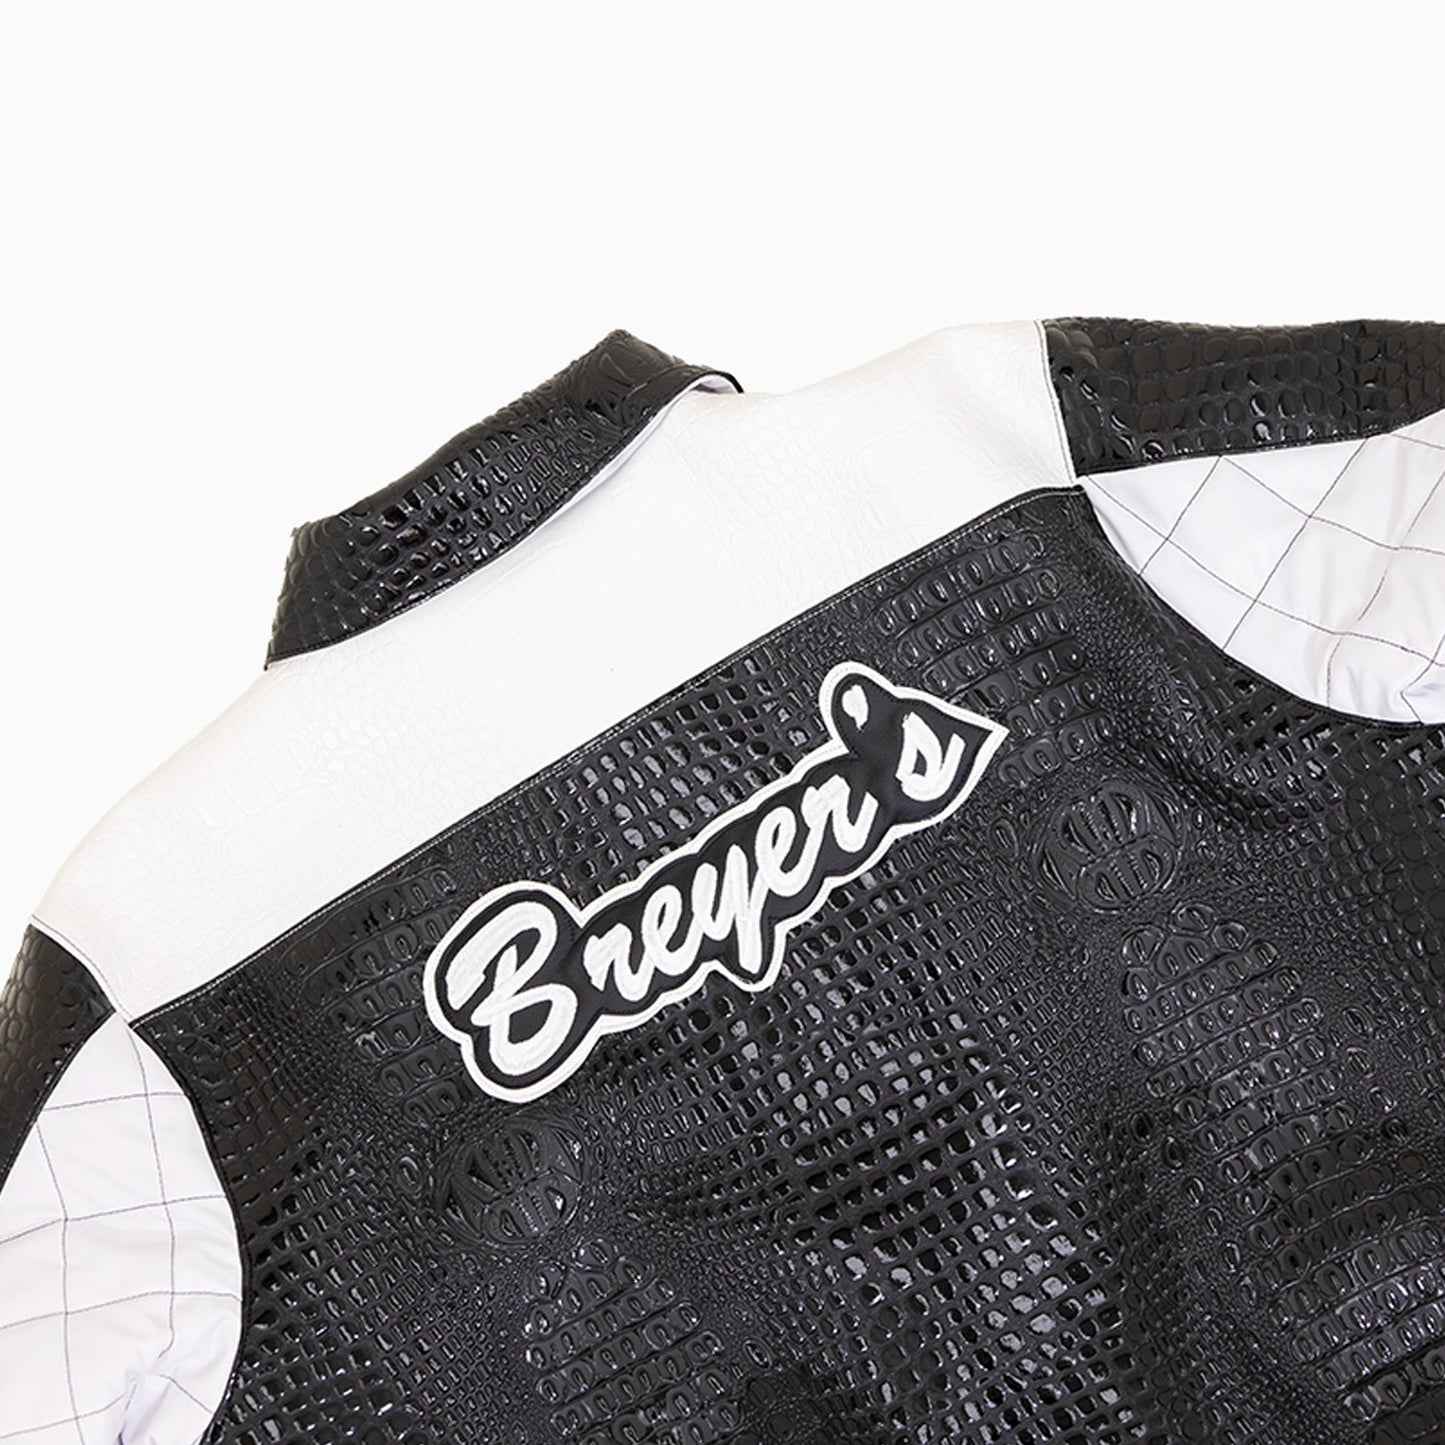 Breyer's Special Edition Leather Jacket